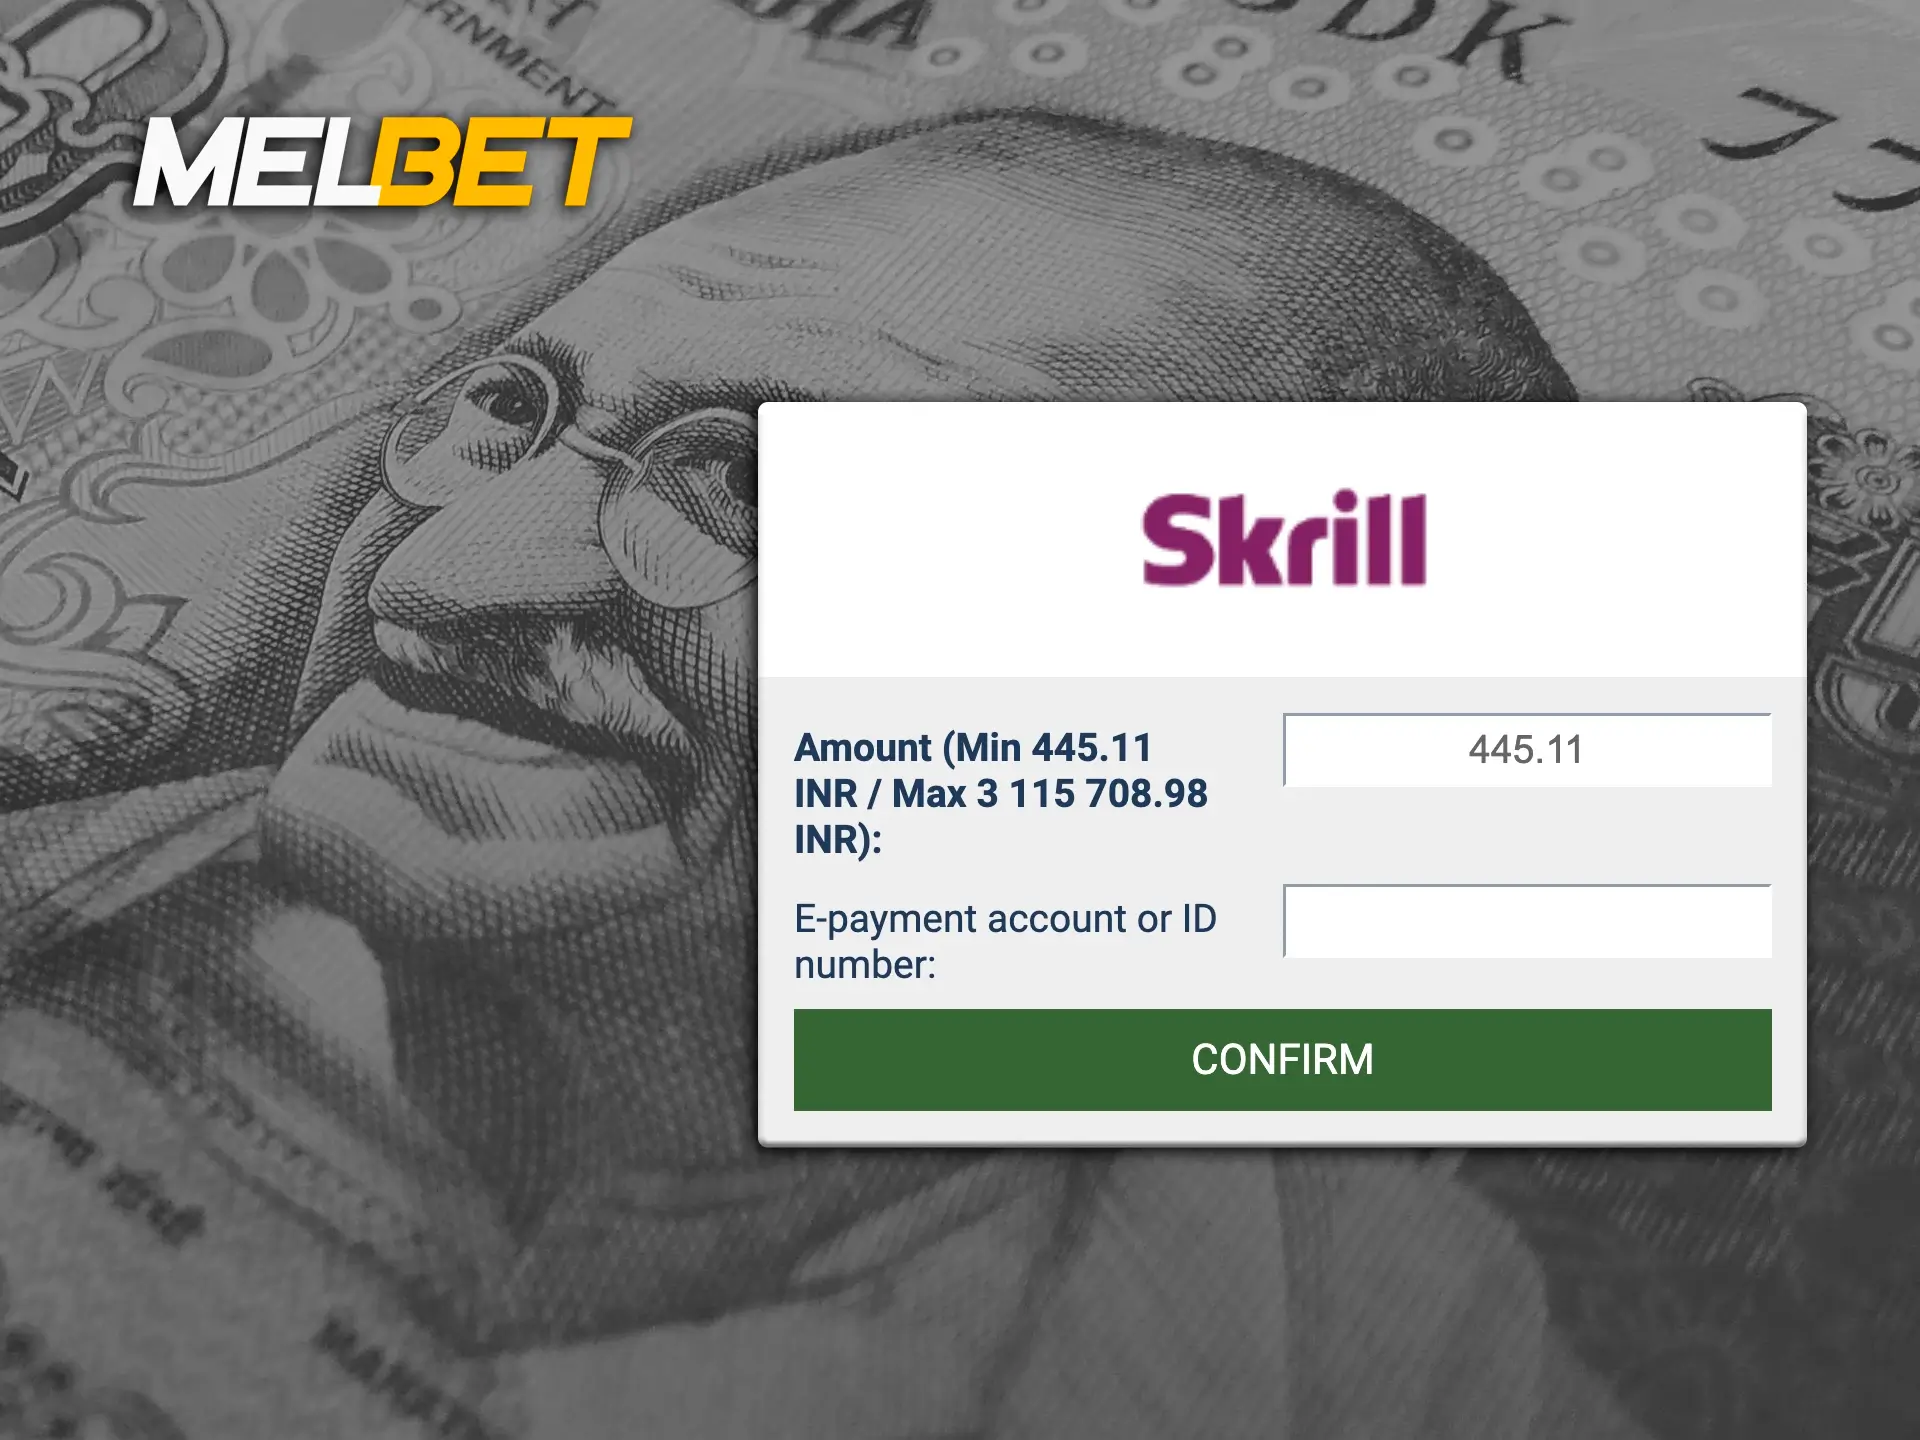 Skrill is a well-known name platform and it is available at Melbet Casino.